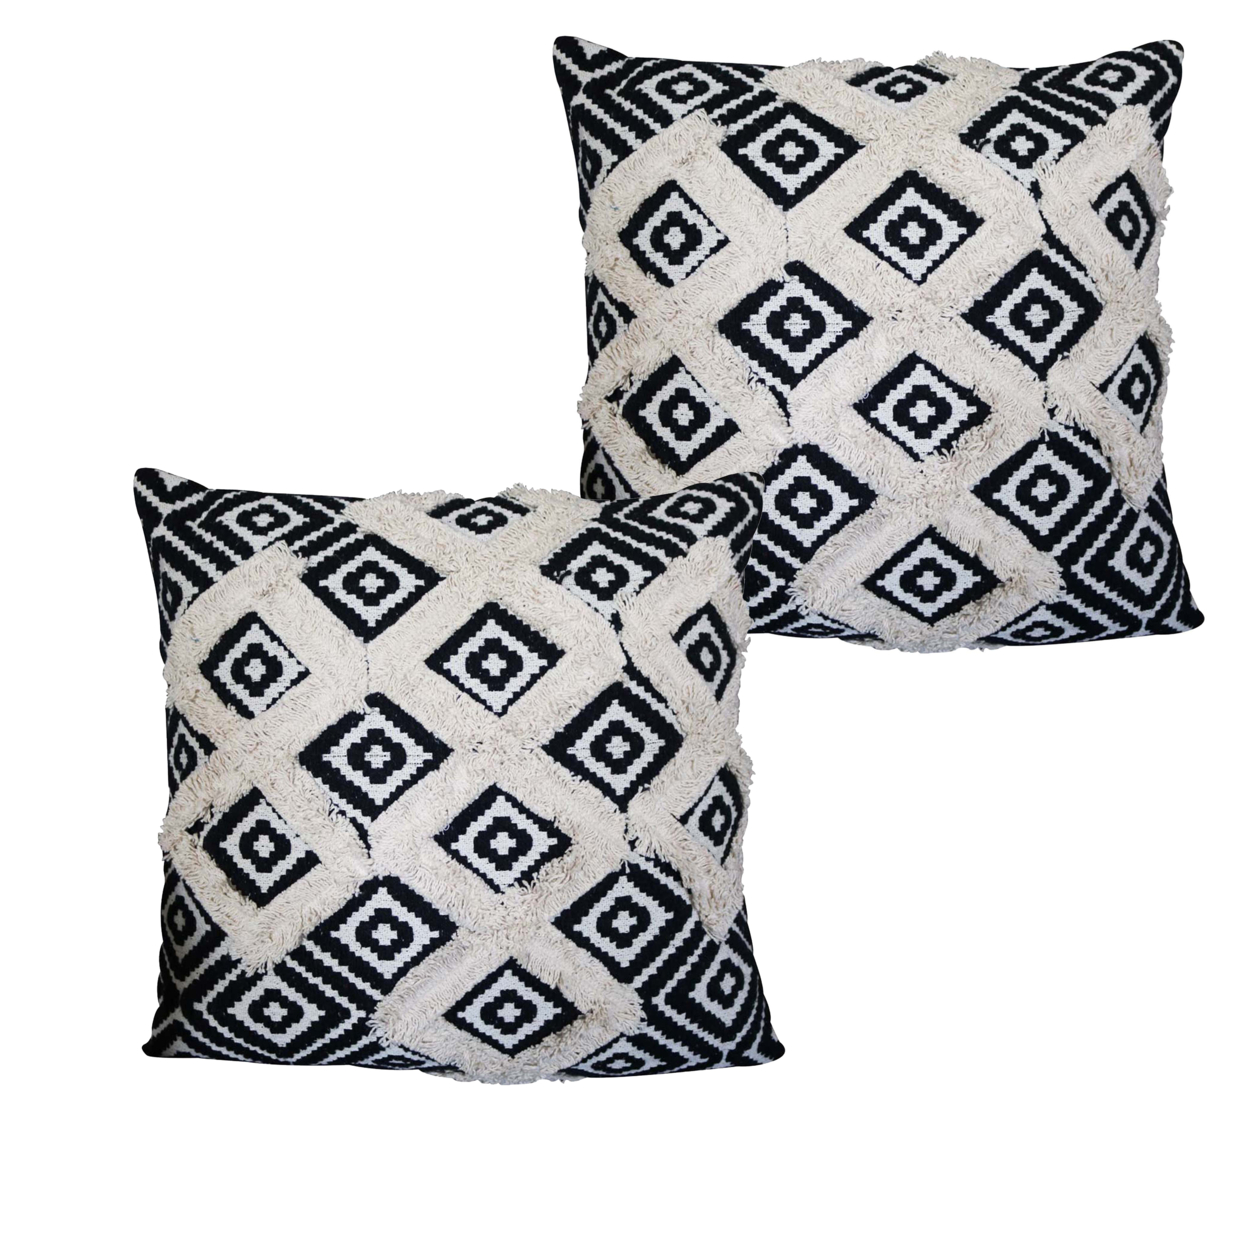 18 X 18 Handcrafted Square Jacquard Soft Cotton Accent Throw Pillow, Diamond Pattern, Set Of 2, White, Black